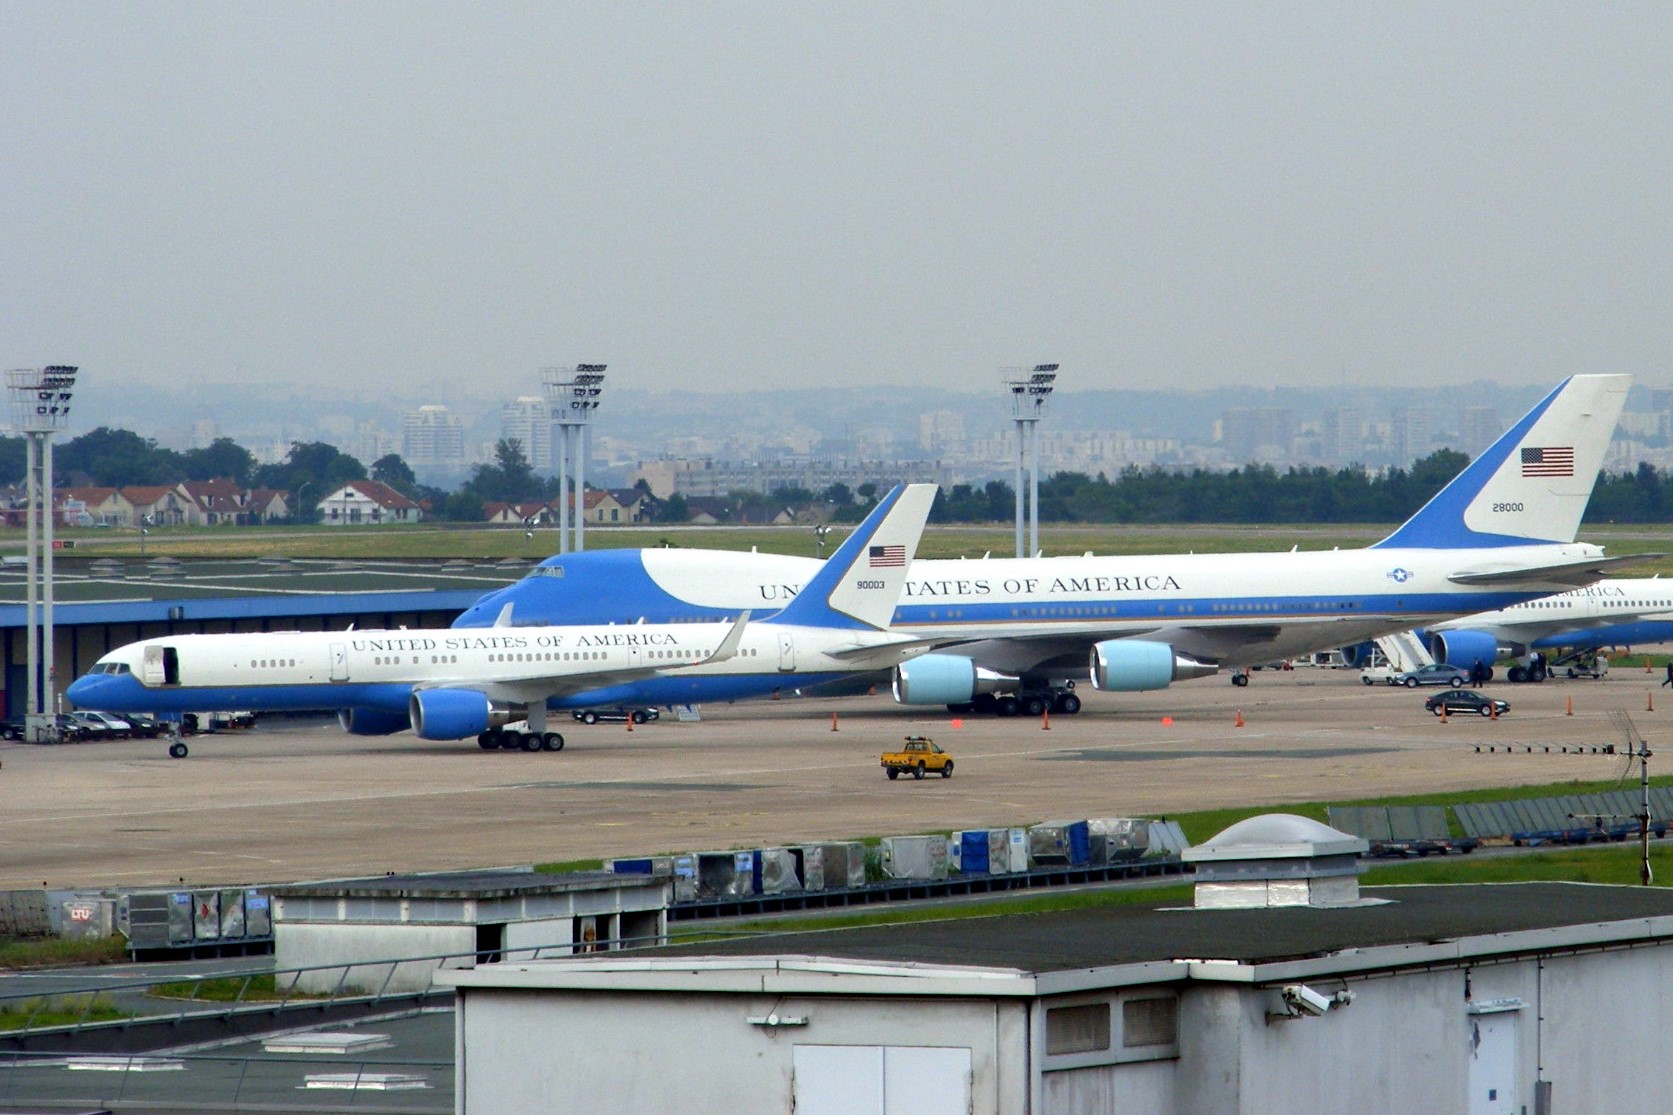 Le jeu des photos - Page 2 Air_Force_One_and_Air_Force_Two_at_Paris_Orly